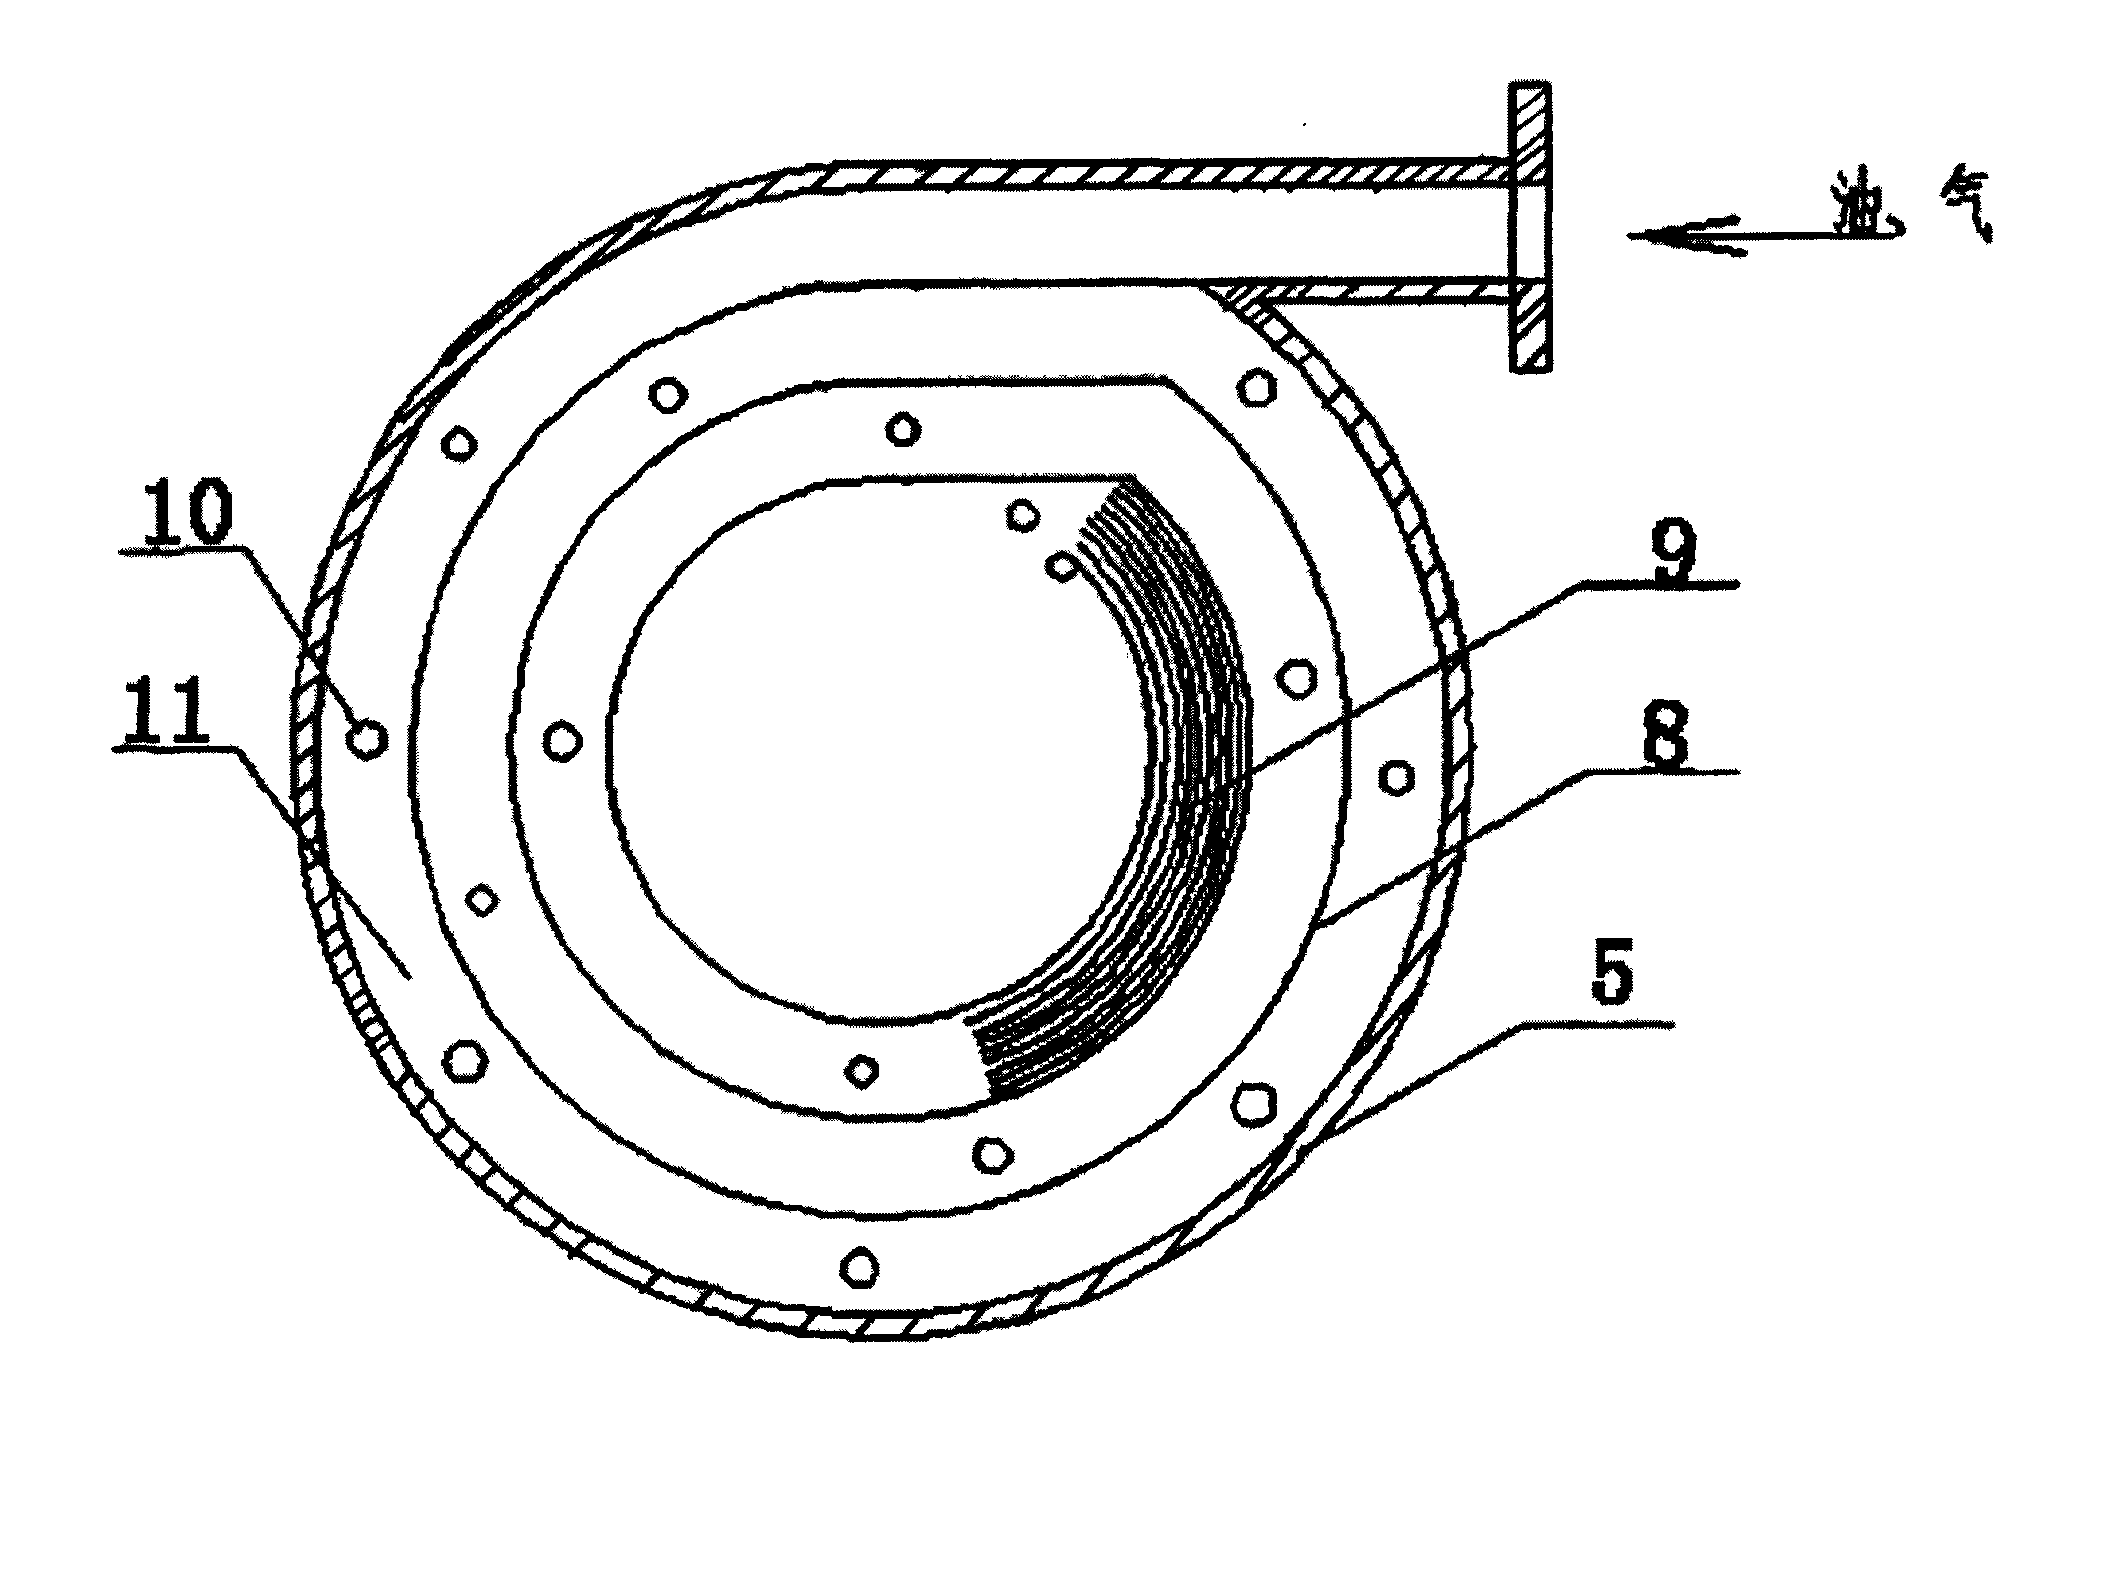 Oil-gas separator having fully-closed helical channel and tail portion micro-channels